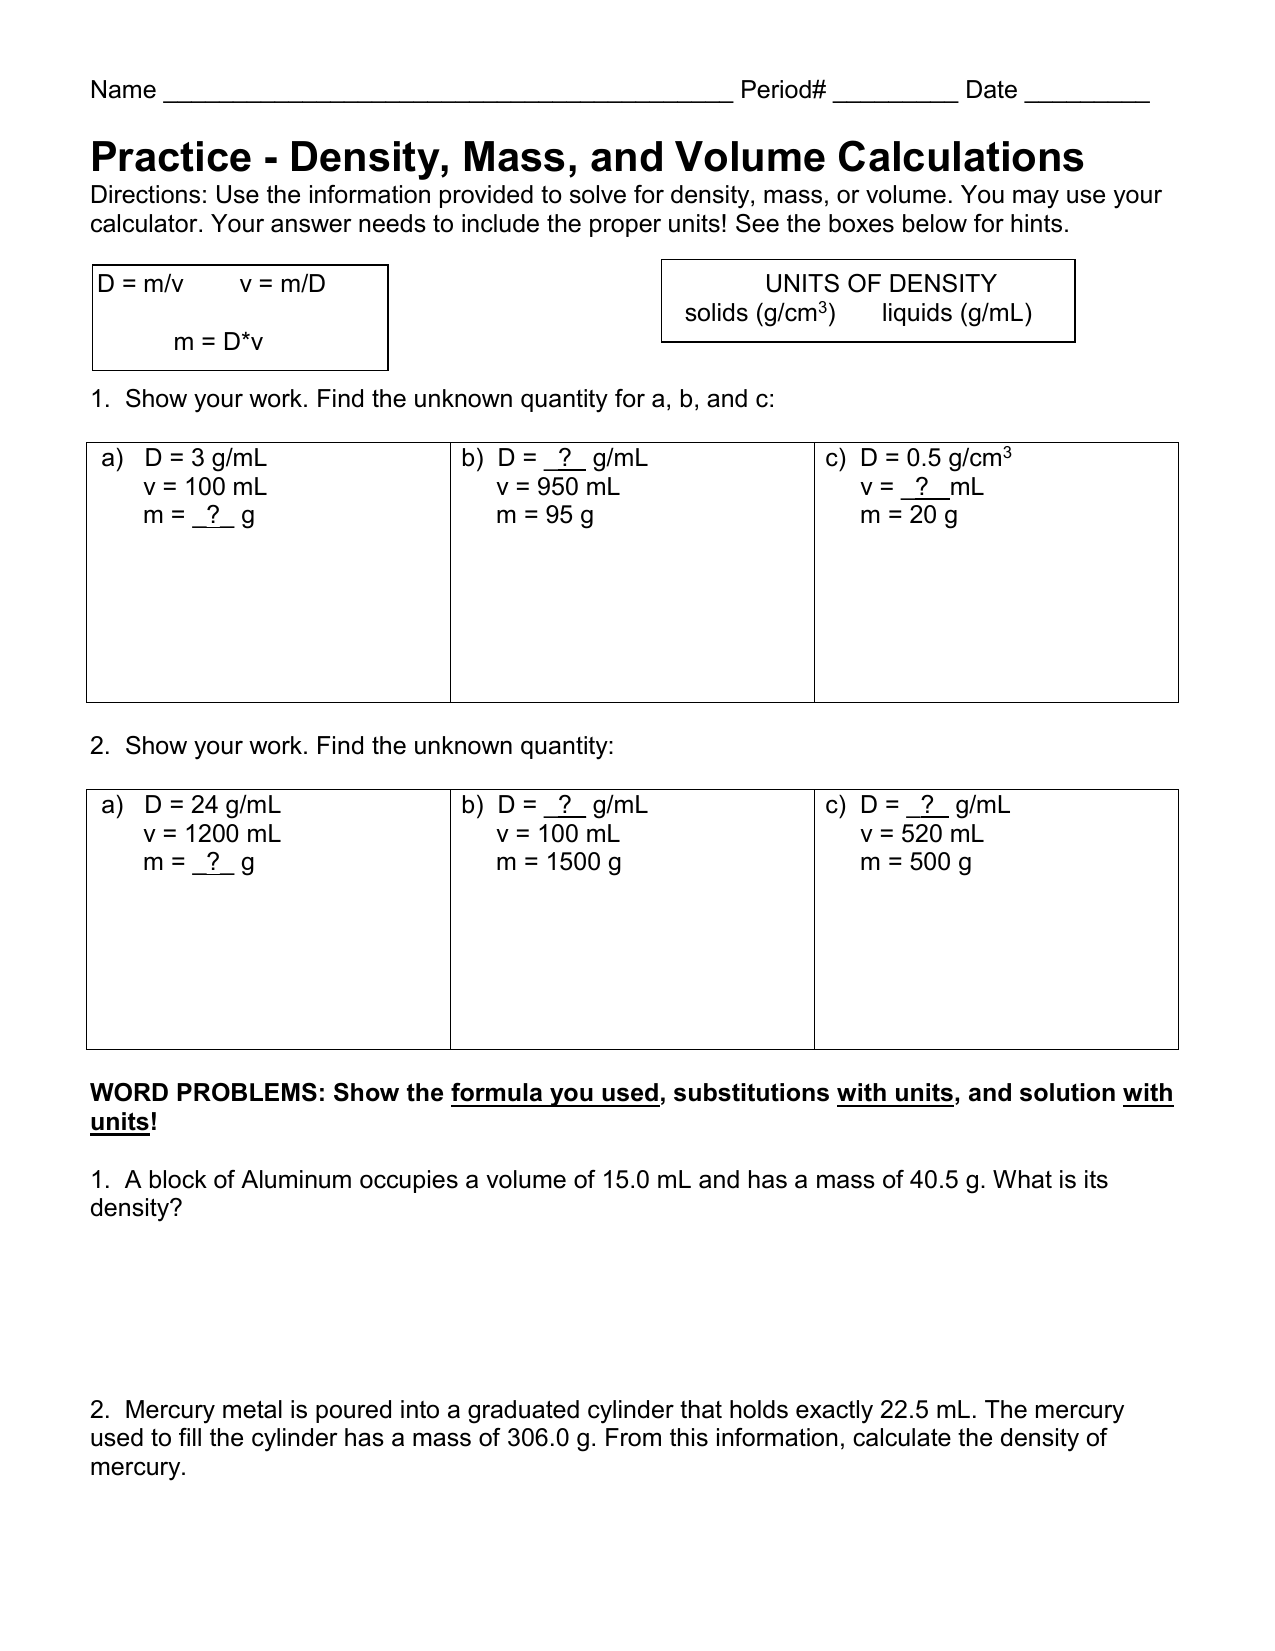 Density How To Calculate Store, 21% OFF  blakstadibiza.com In Density Calculations Worksheet Answers